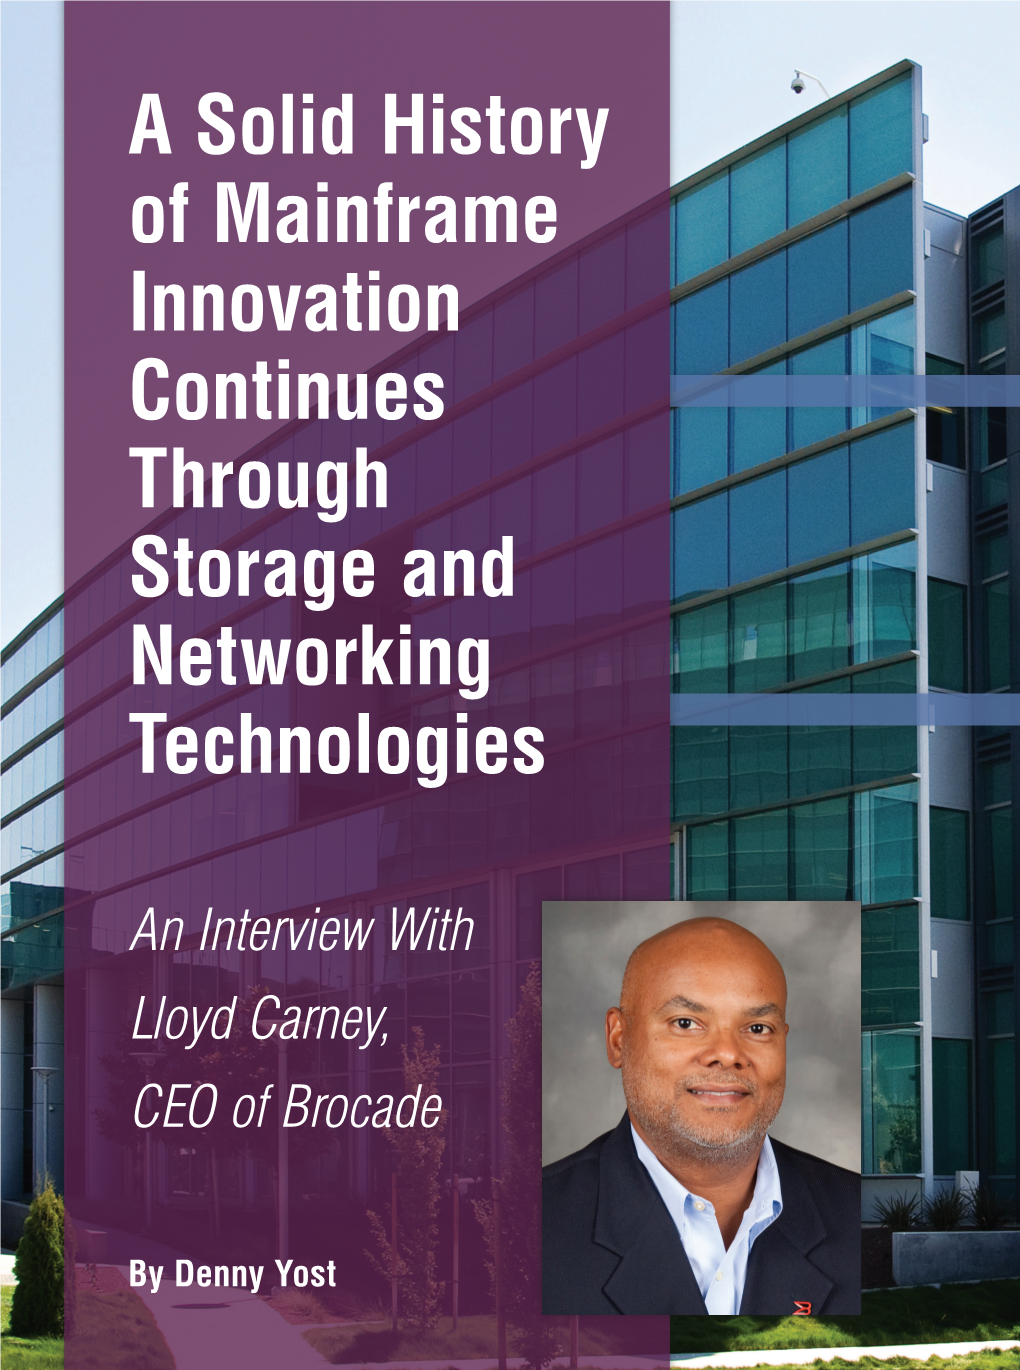 A Solid History of Mainframe Innovation Continues Through Storage and Networking Technologies